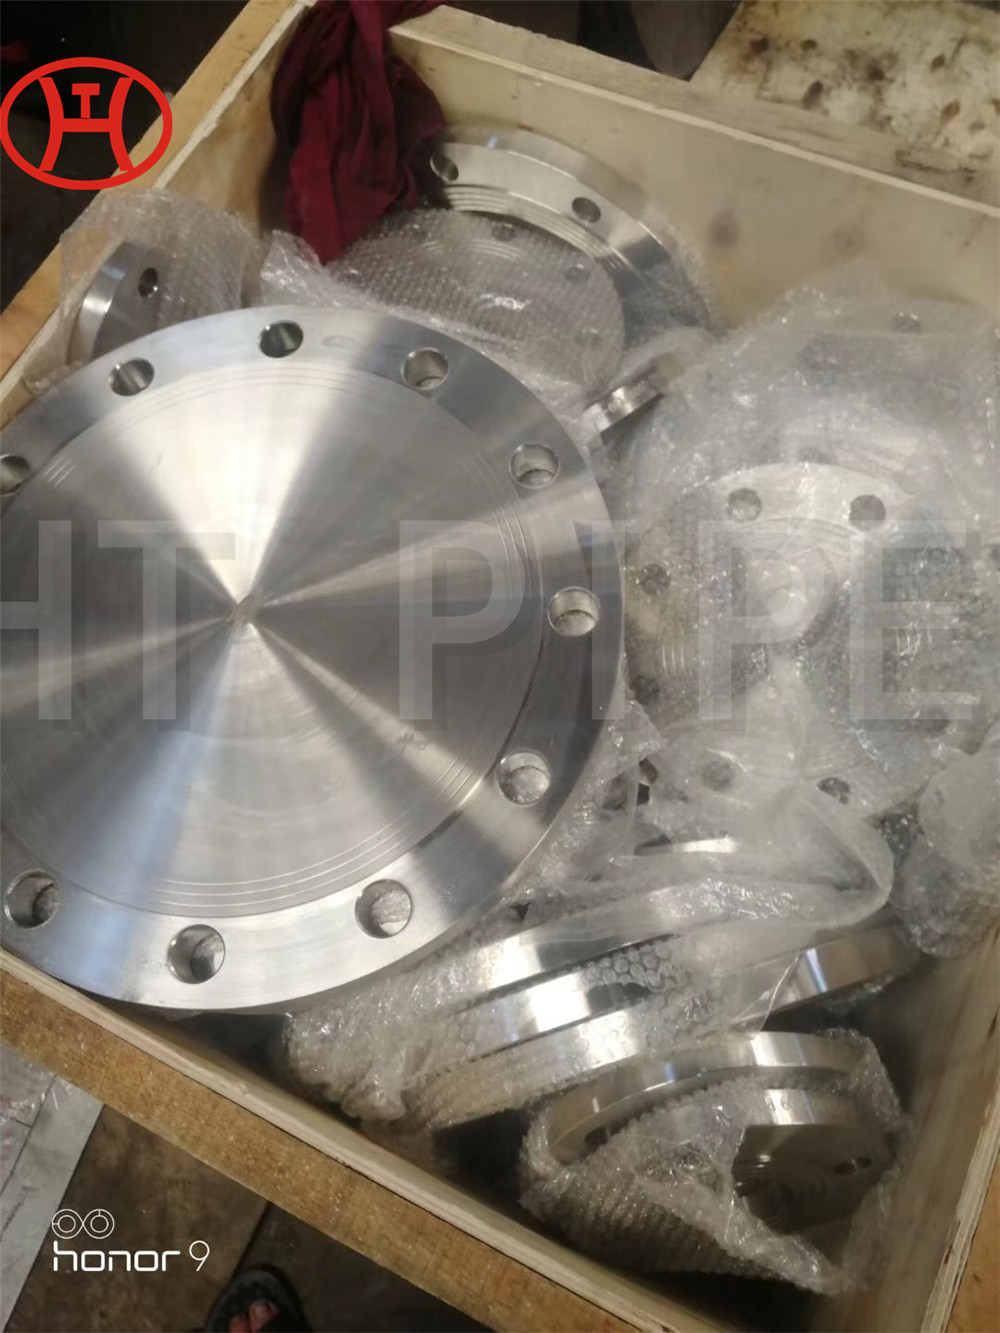 Inspection Photos Before Shipment Raised Face Flange